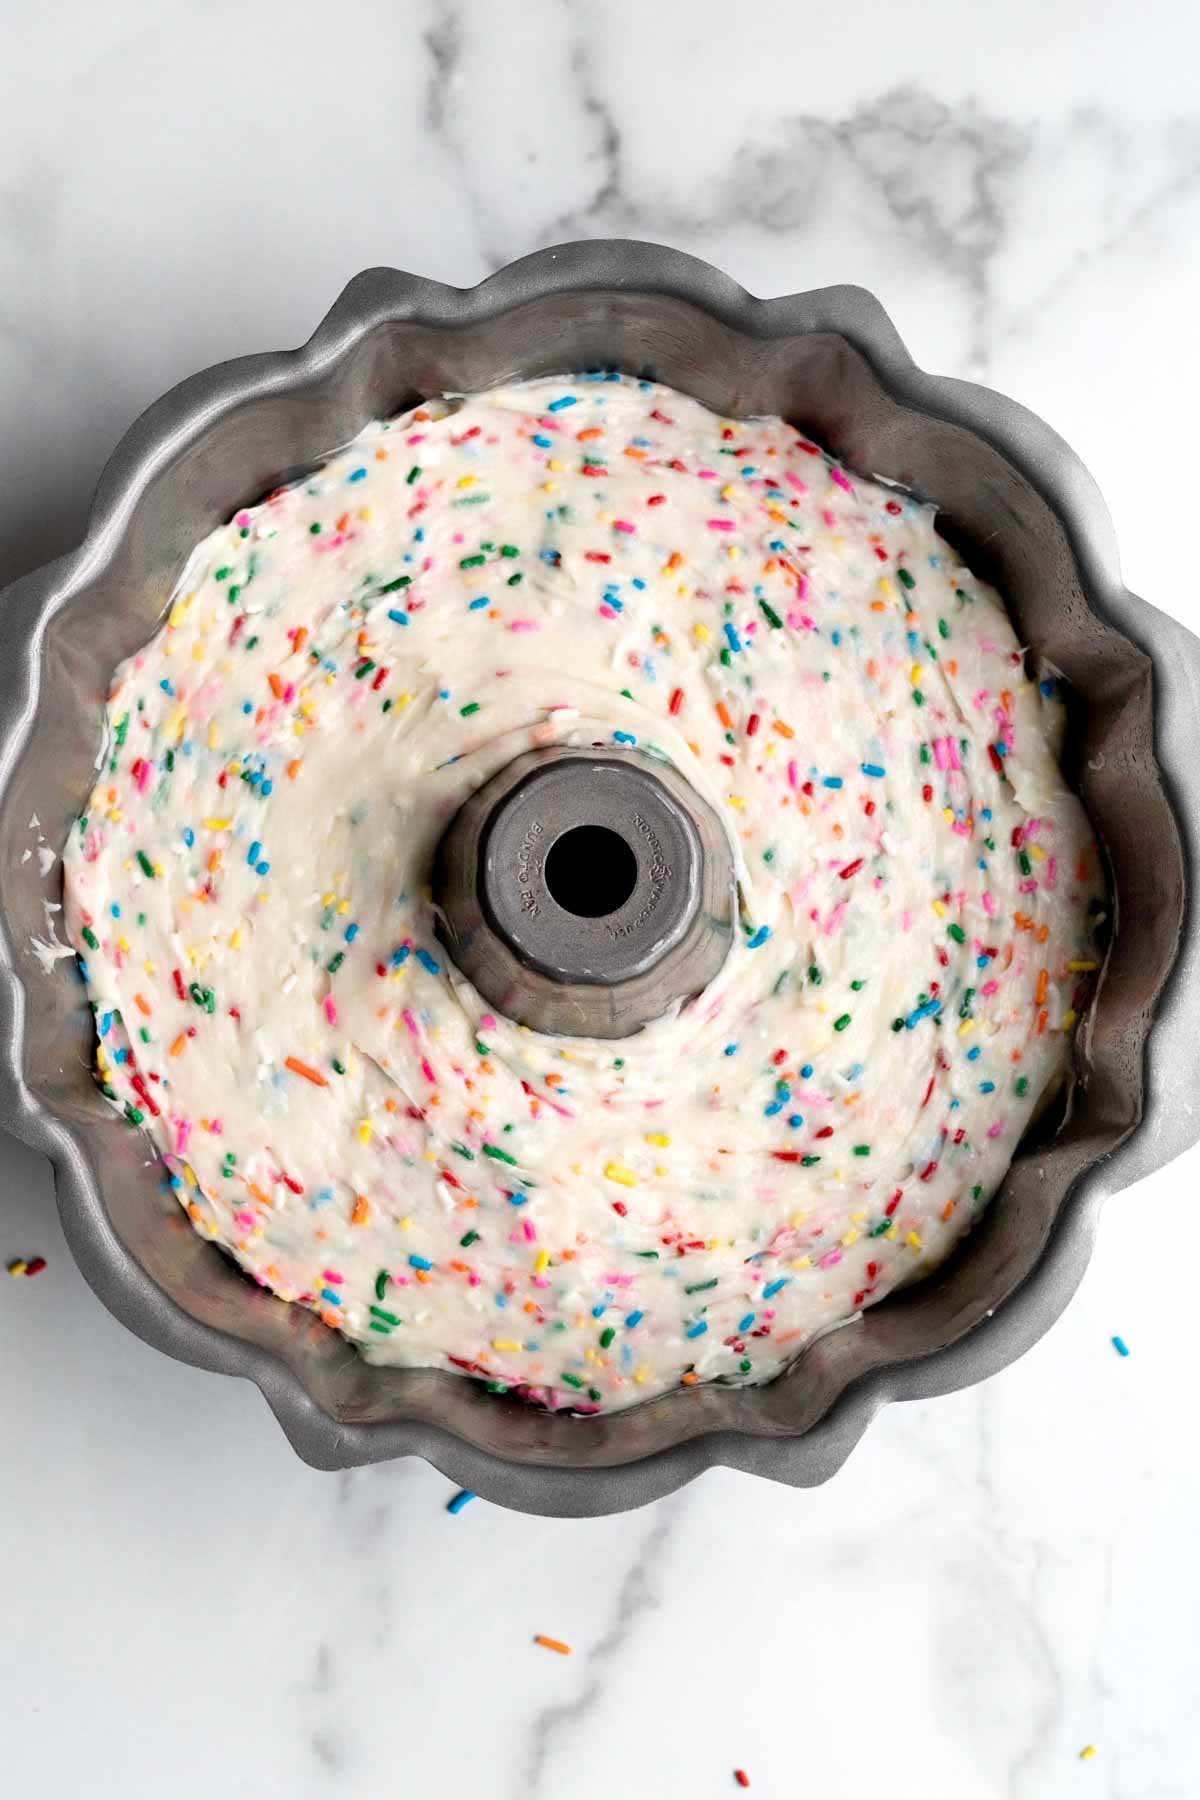 Filling up a round bundt pan with the batter.